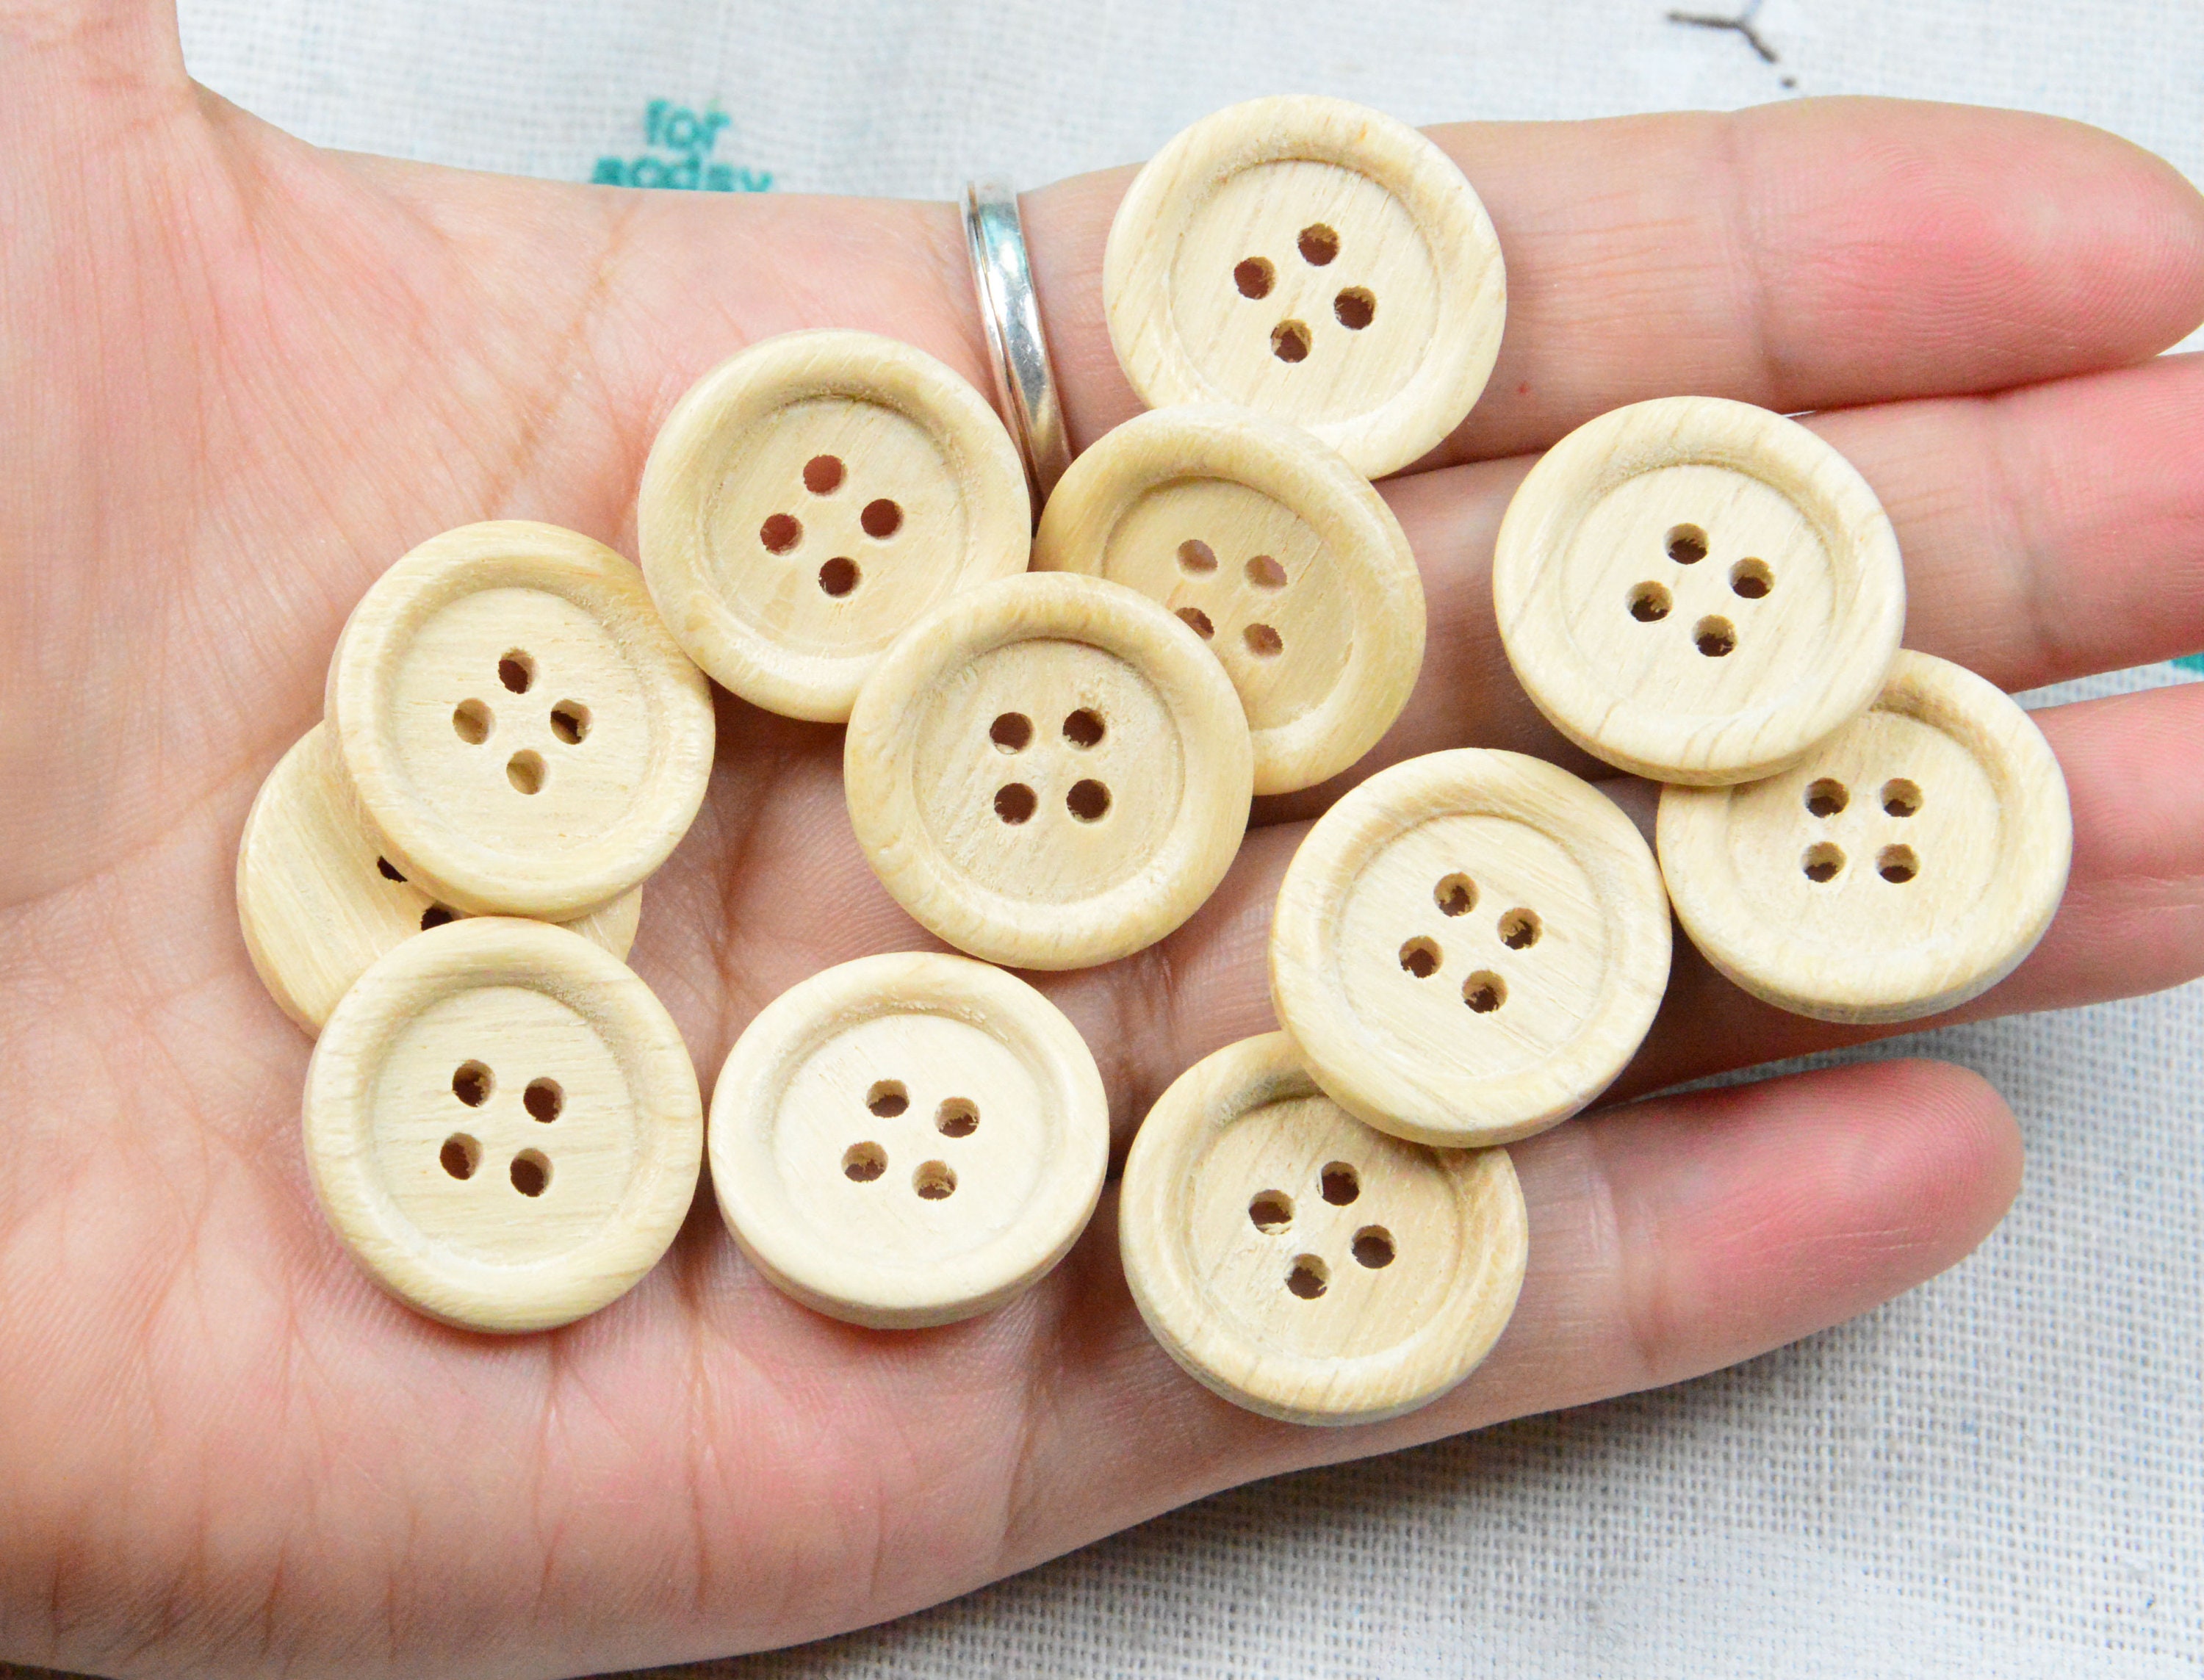 50pcs/lot Size: 12.5mm-20mm Natural Wooden Buttons for Crafts4